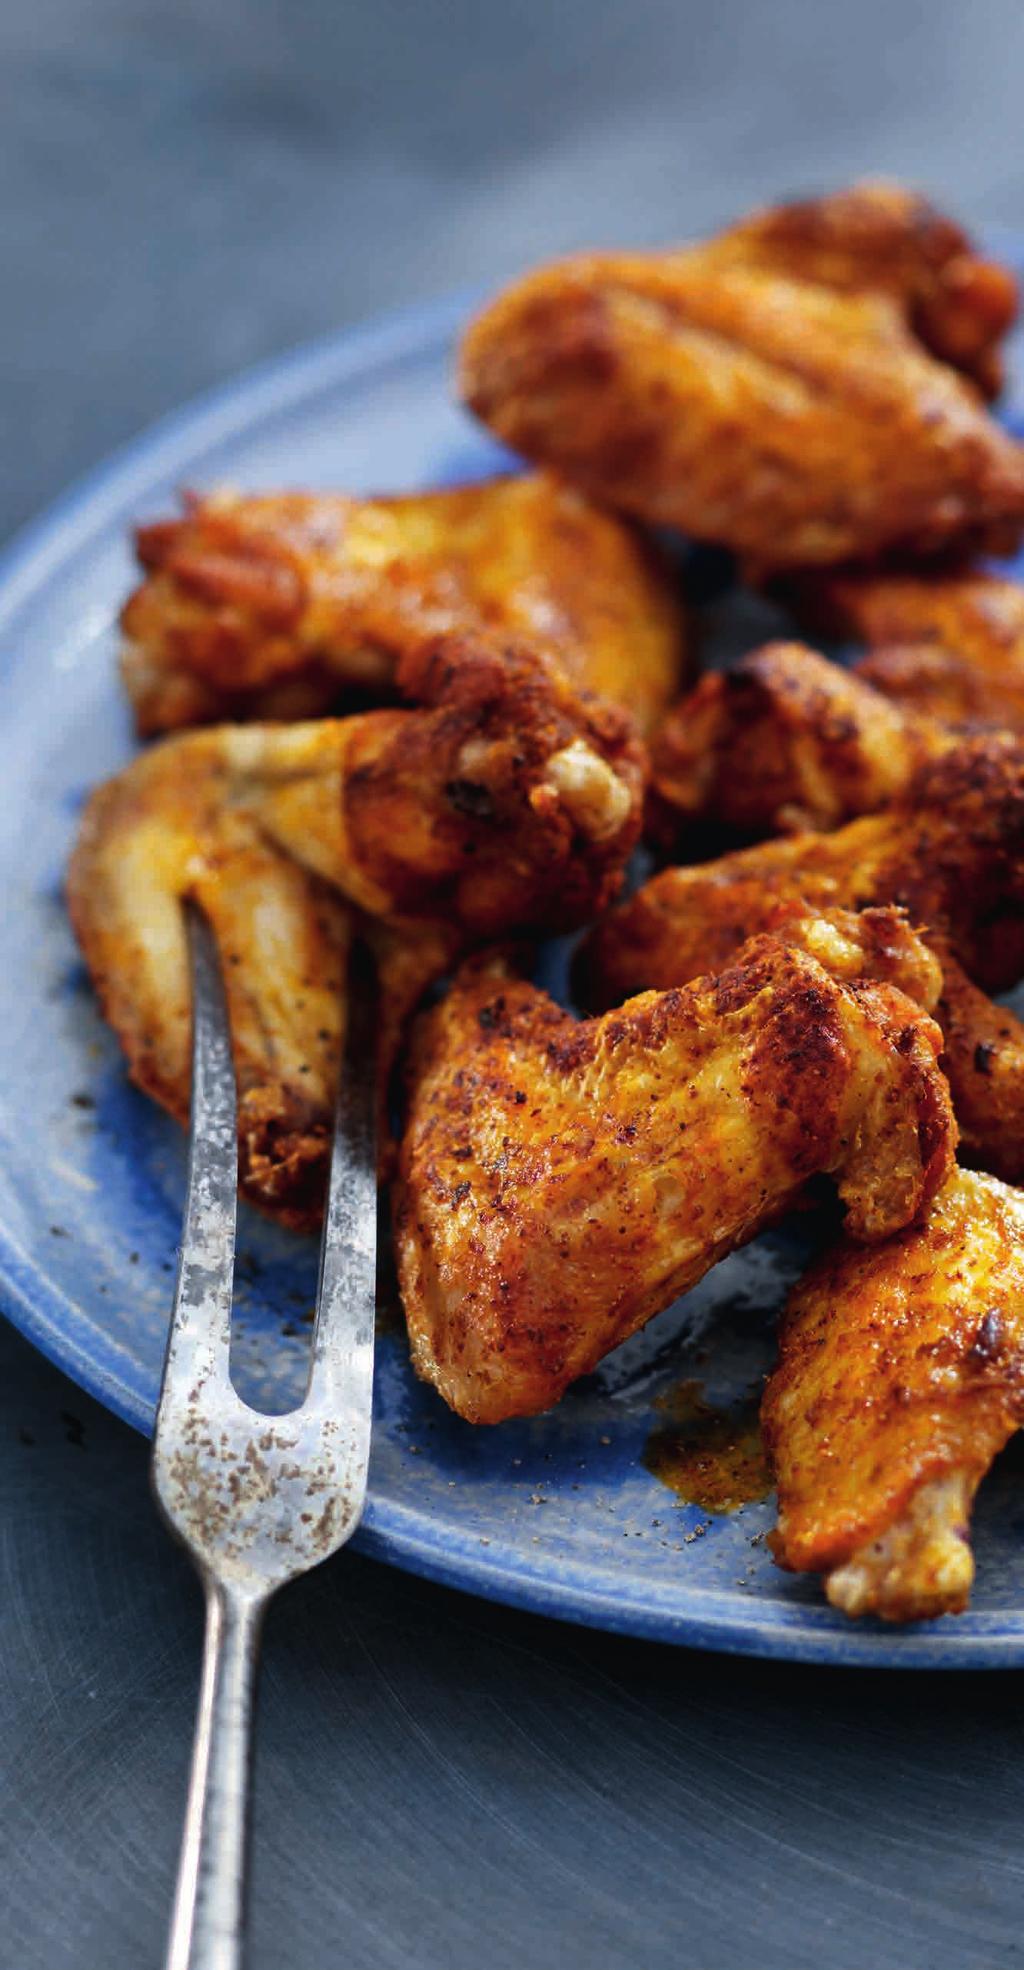 Roasted Asian Chicken Wings Main course - 4 portions 5 minutes + 10 minutes airfryer 2 cloves garlic 2 teaspoons ginger powder 1 teaspoon ground cumin 500 g chicken wings at room temperature 100 ml